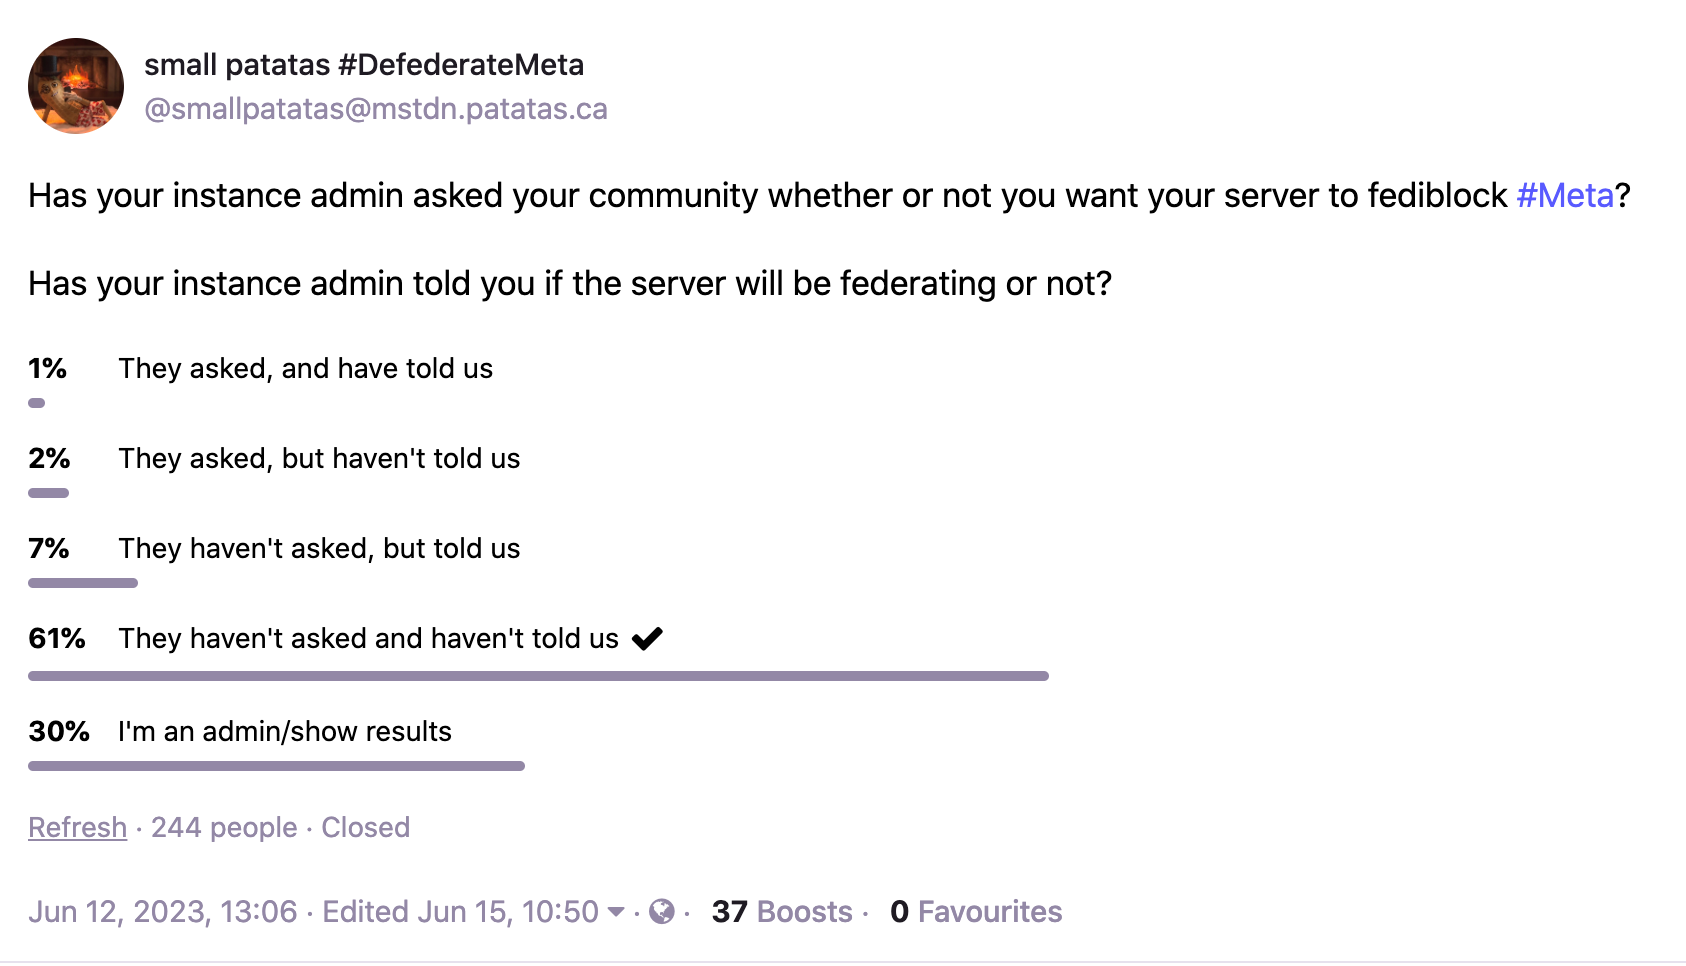 Has your instance admin asked your community whether or not you want your server to fediblock #Meta?  Has your instance admin told you if the server will be federating or not?  1% They asked, and have told us 2% They asked, but haven't told us 7% They haven't asked, but told us 61% They haven't asked and haven't told us 30% I'm an admin/show results